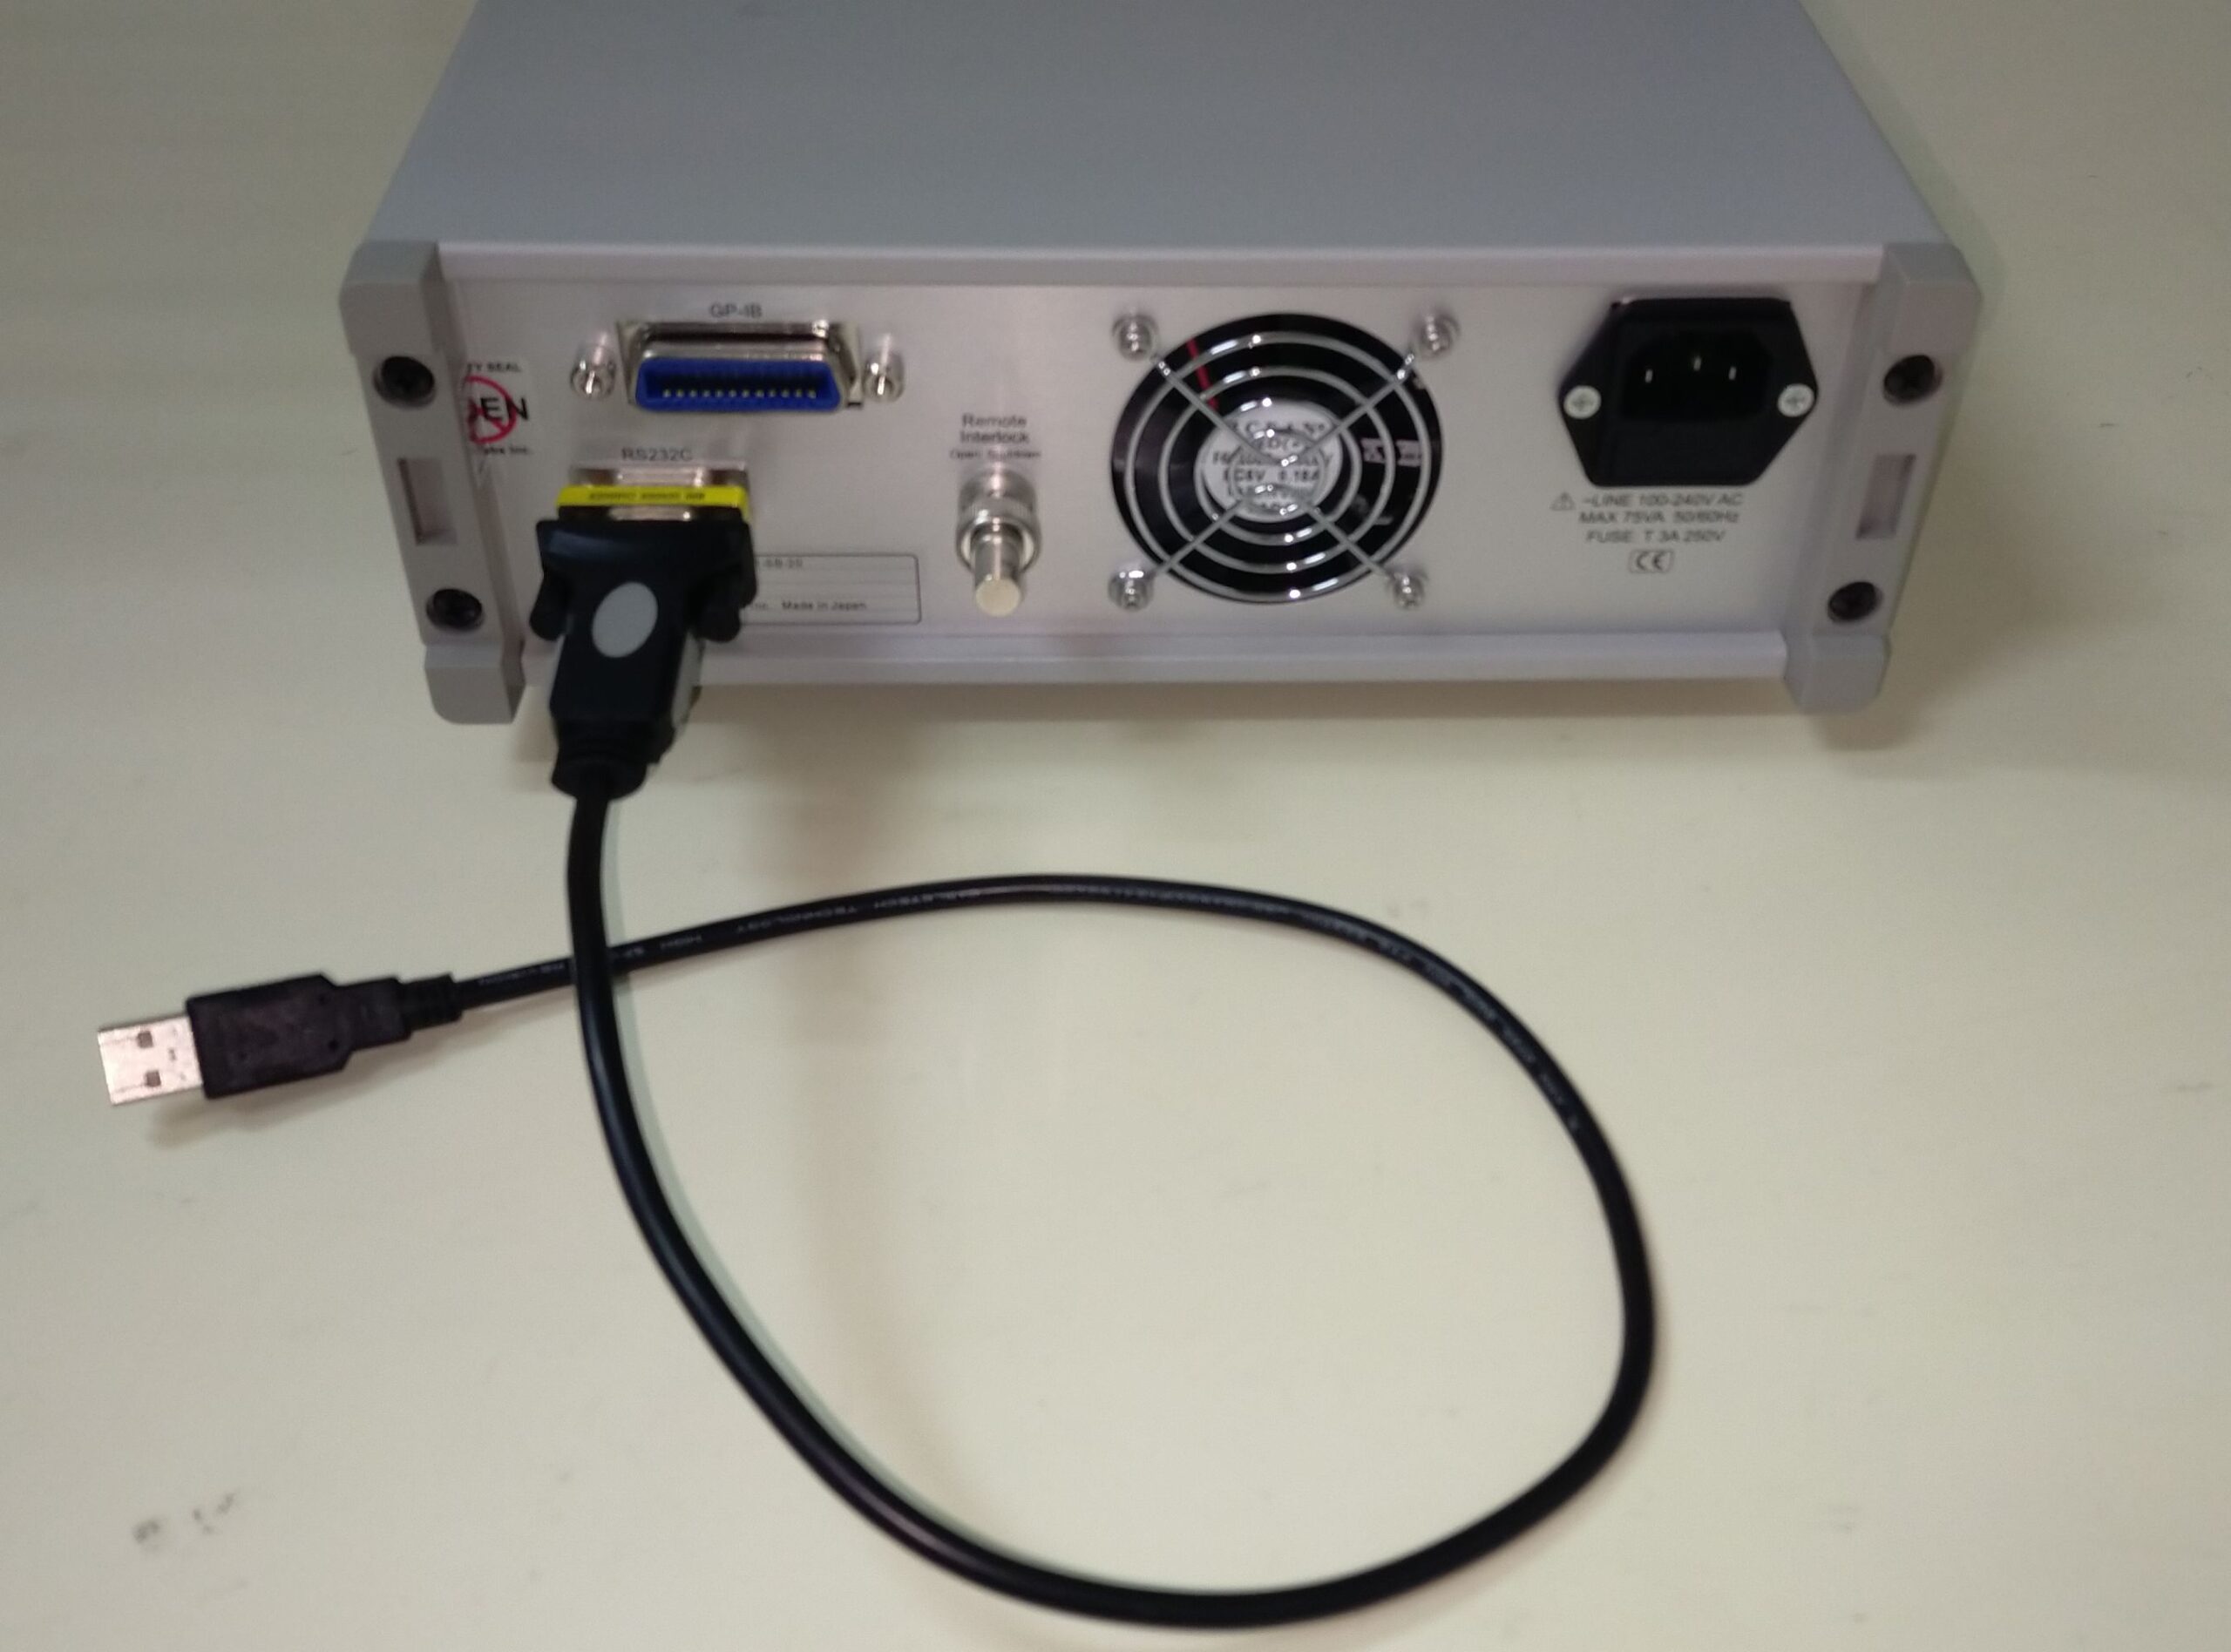 USB-serial cable and DB9 gender changer attached onto FiberLabs' bench-top chassis